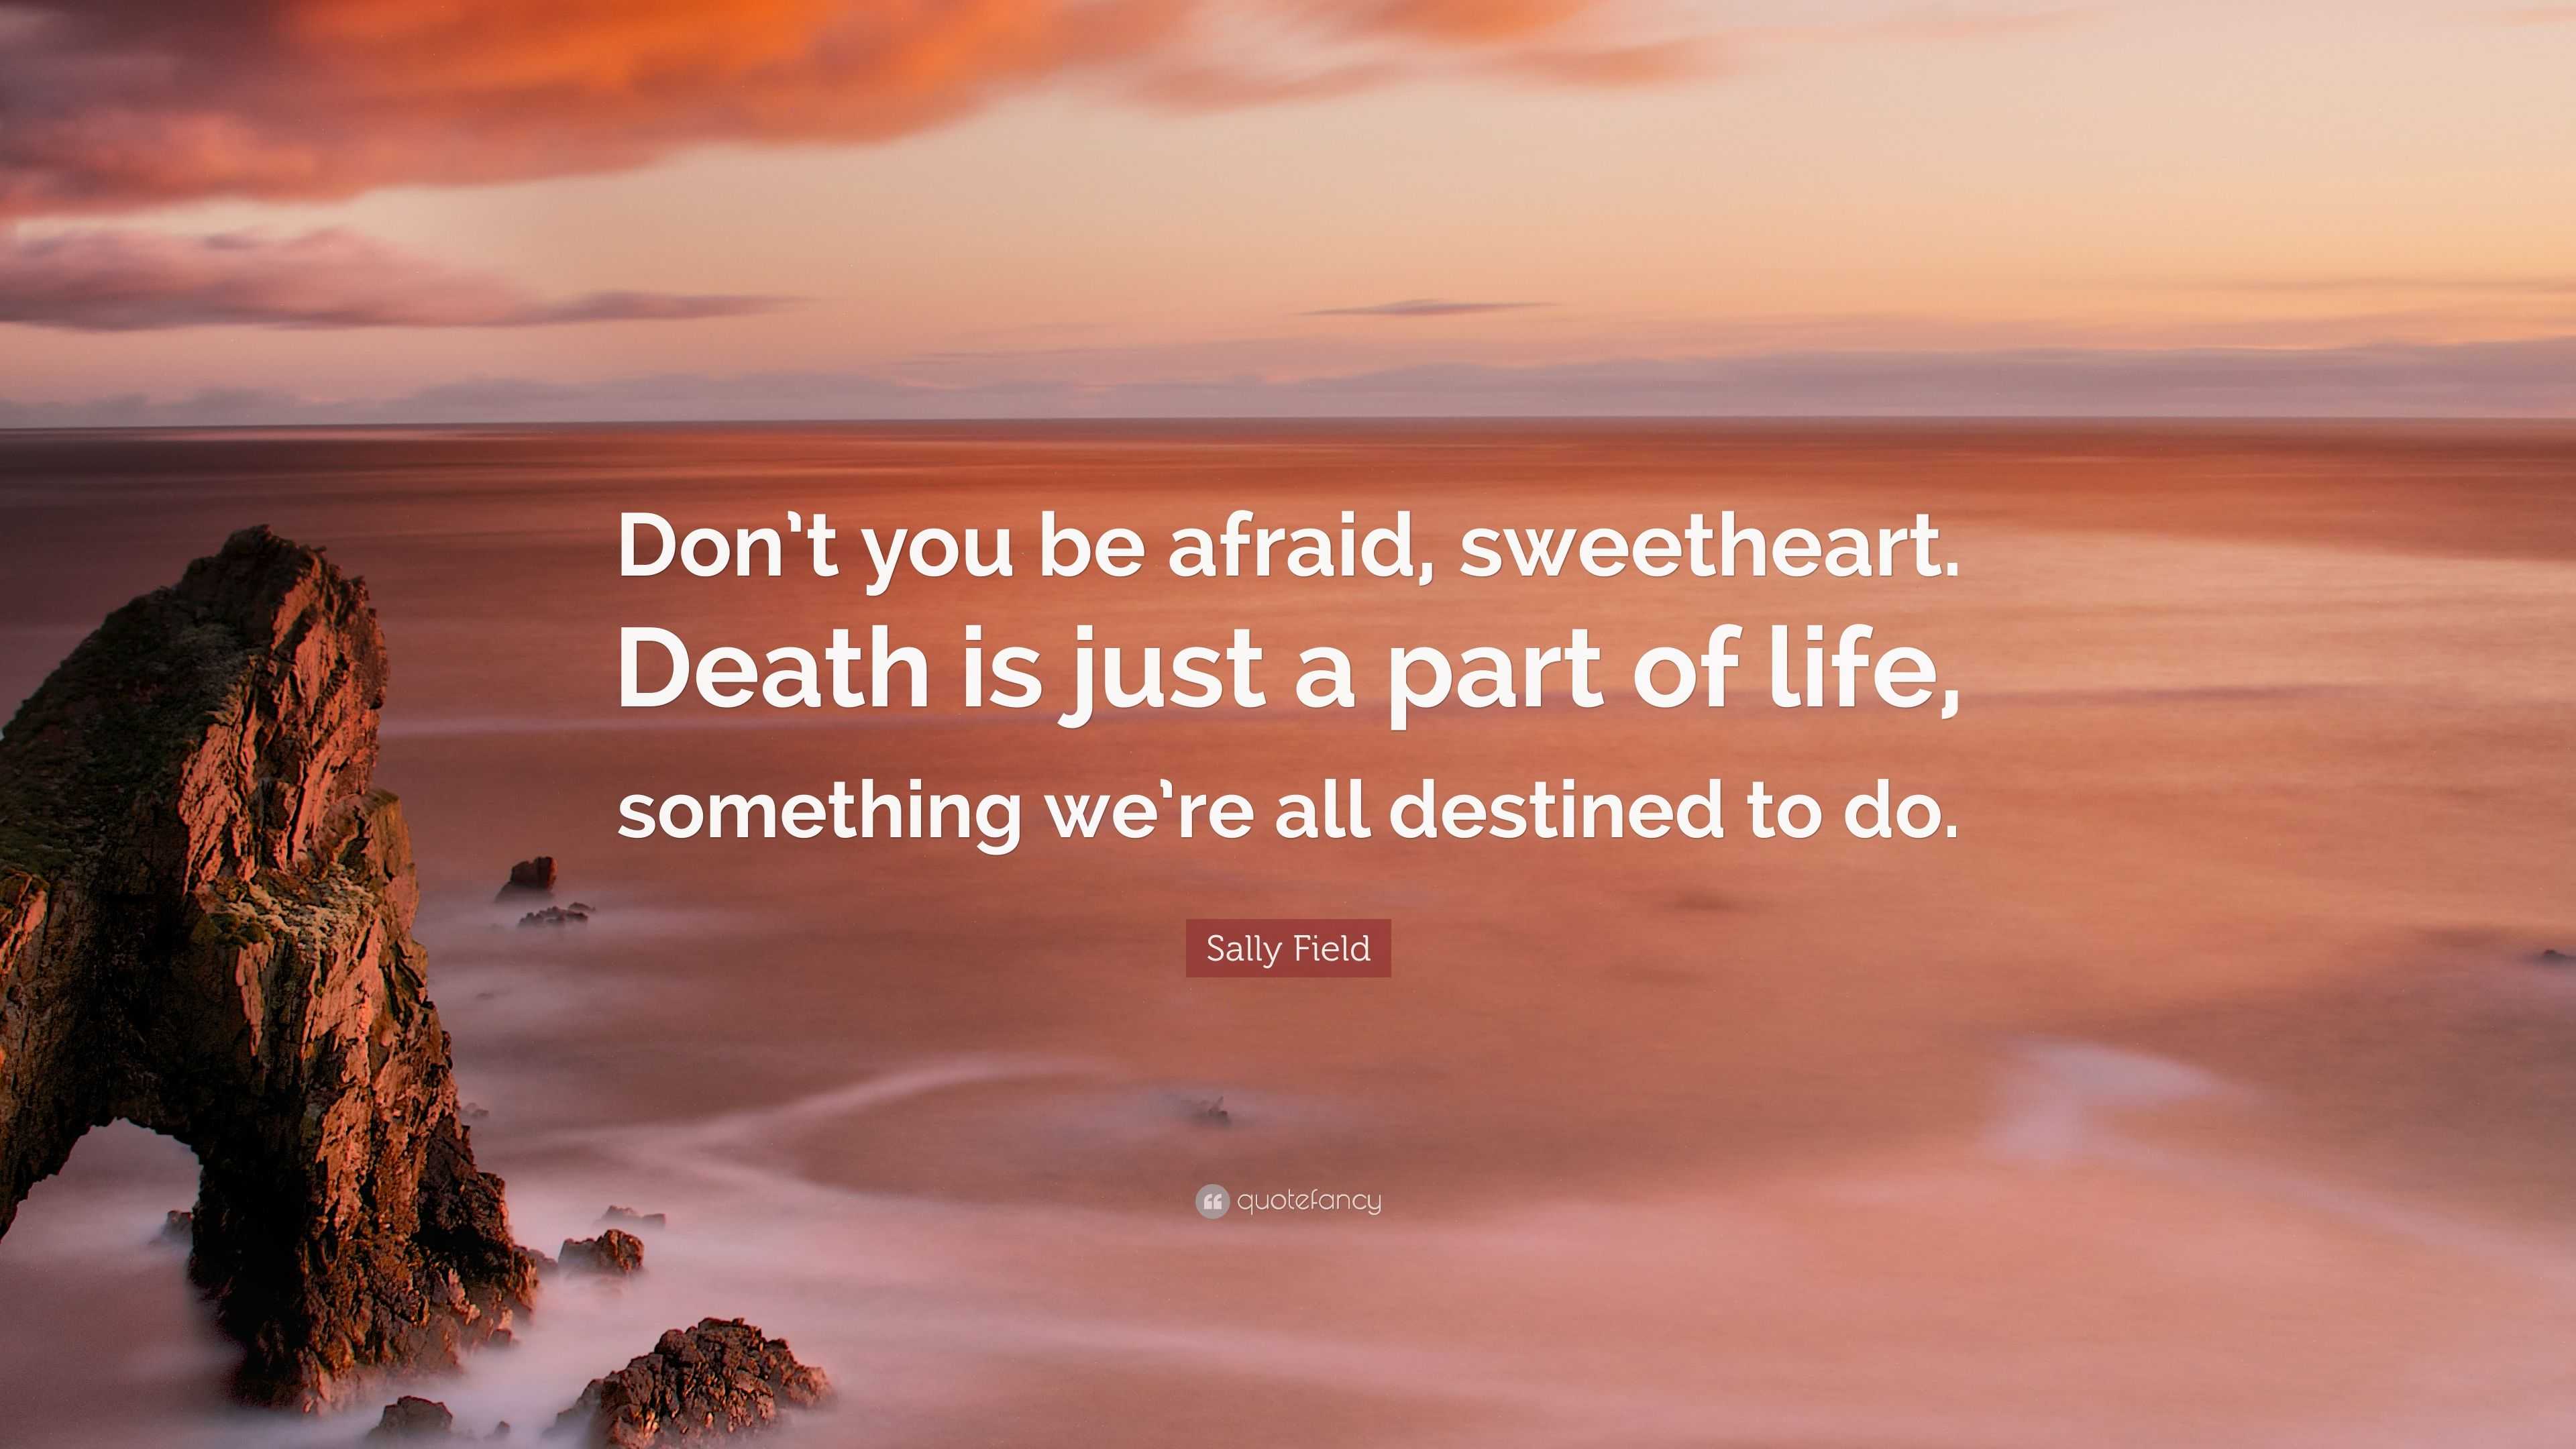 Sally Field Quote: “Don’t you be afraid, sweetheart. Death is just a ...